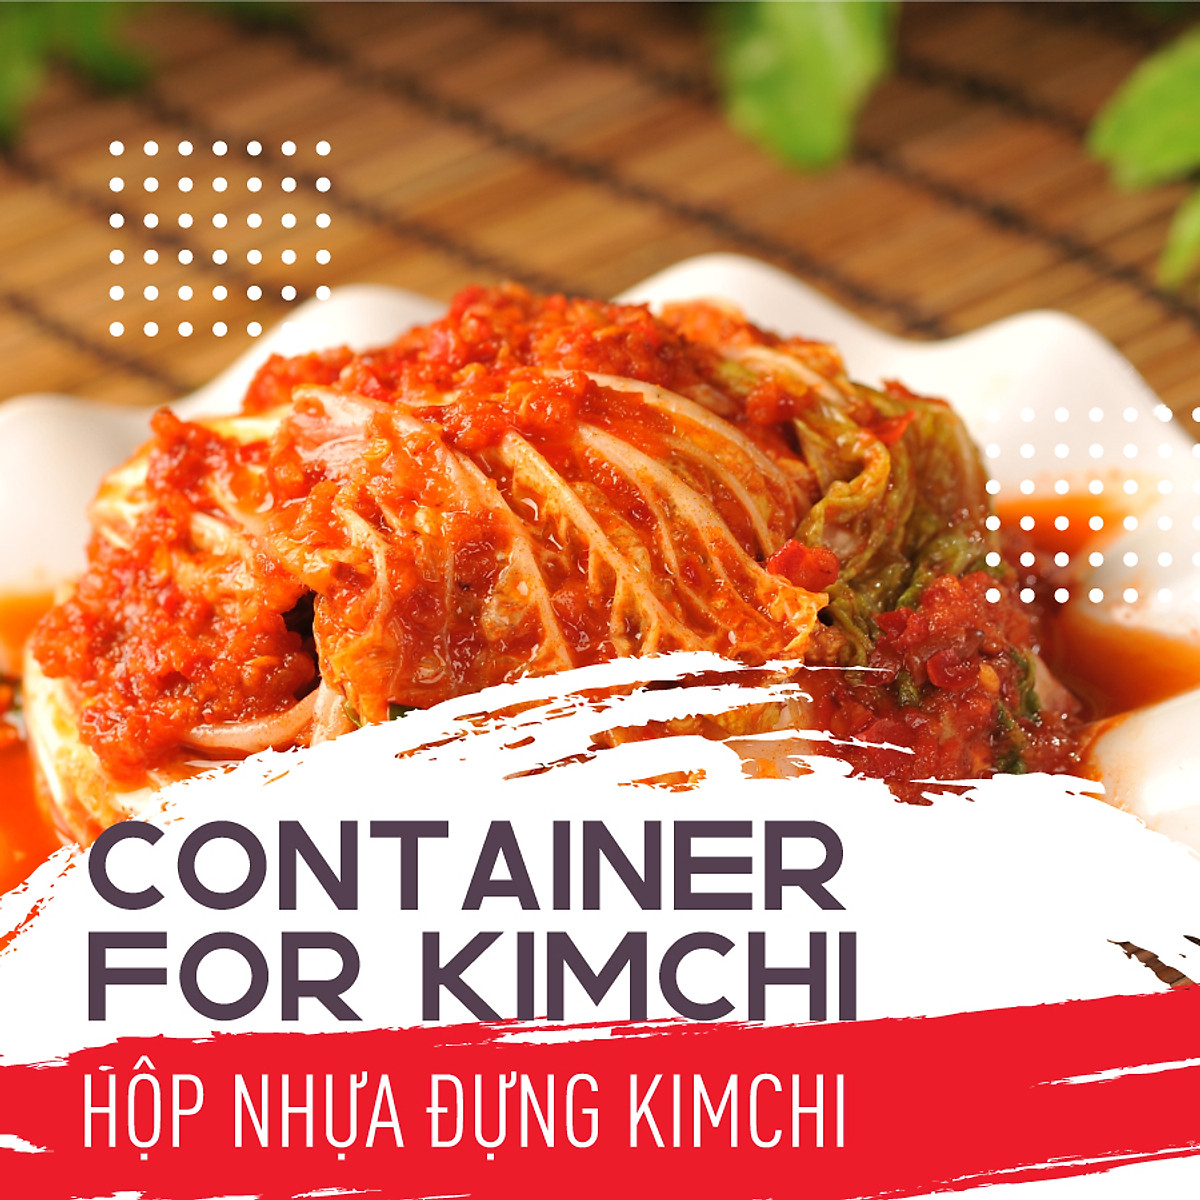 How to know if your Kimchi is fermenting? – JIN Kimchi